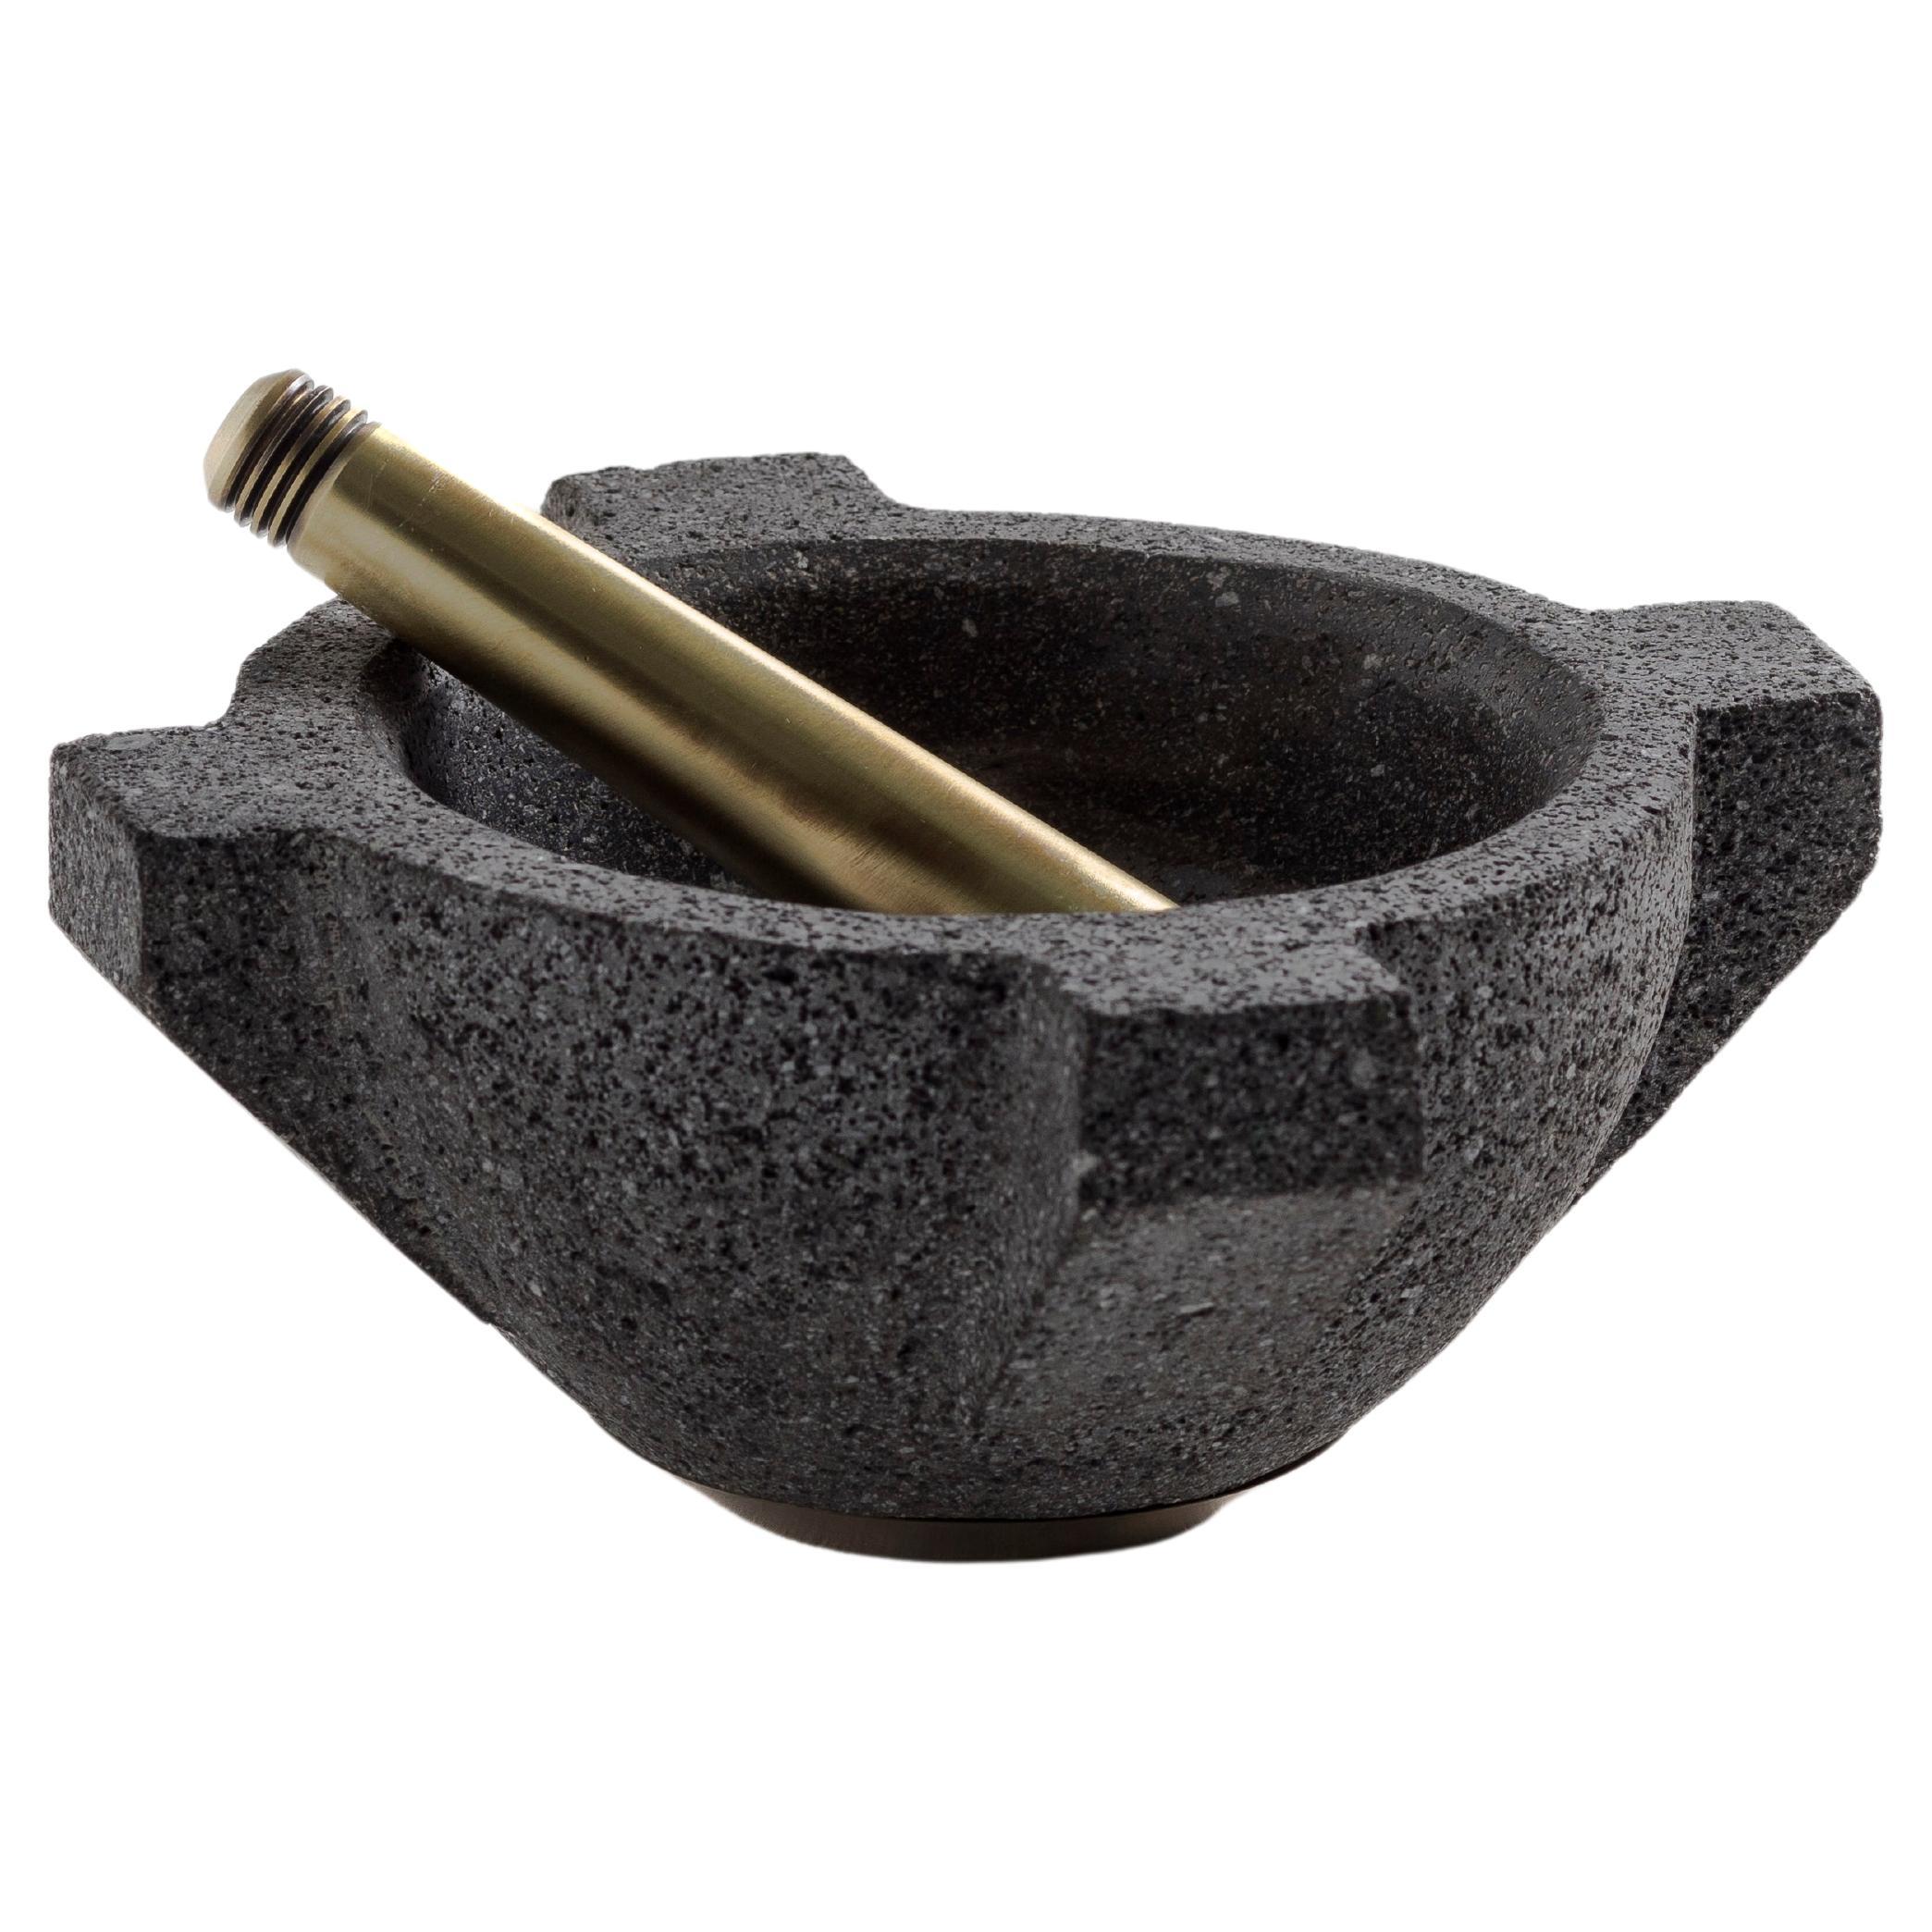 MORTERO Decorative Volcanic Stone Bowl with Bronze Details by ANDEAN, In Stock